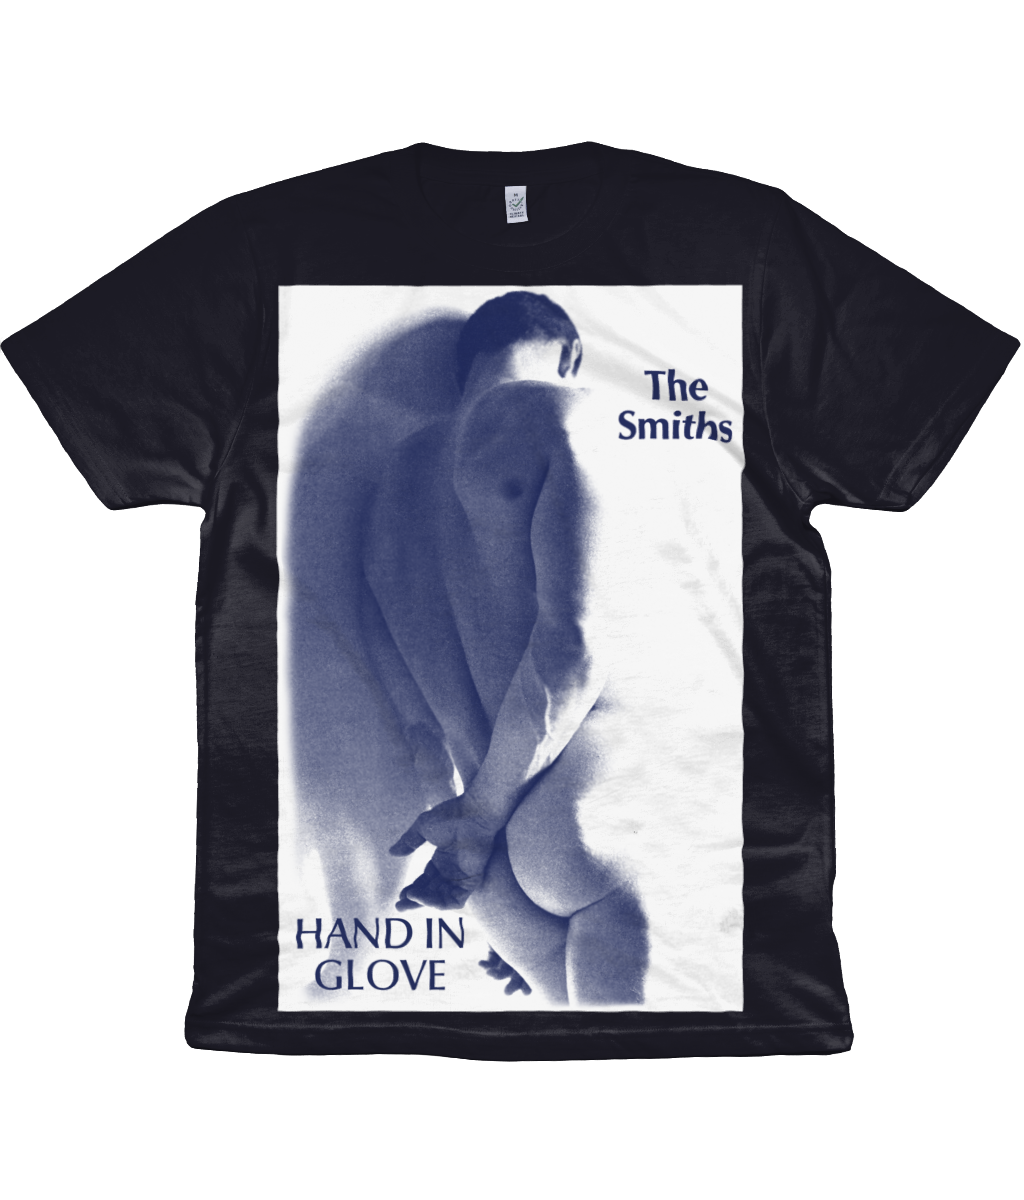 THE SMITHS - Hand In Glove - 1983